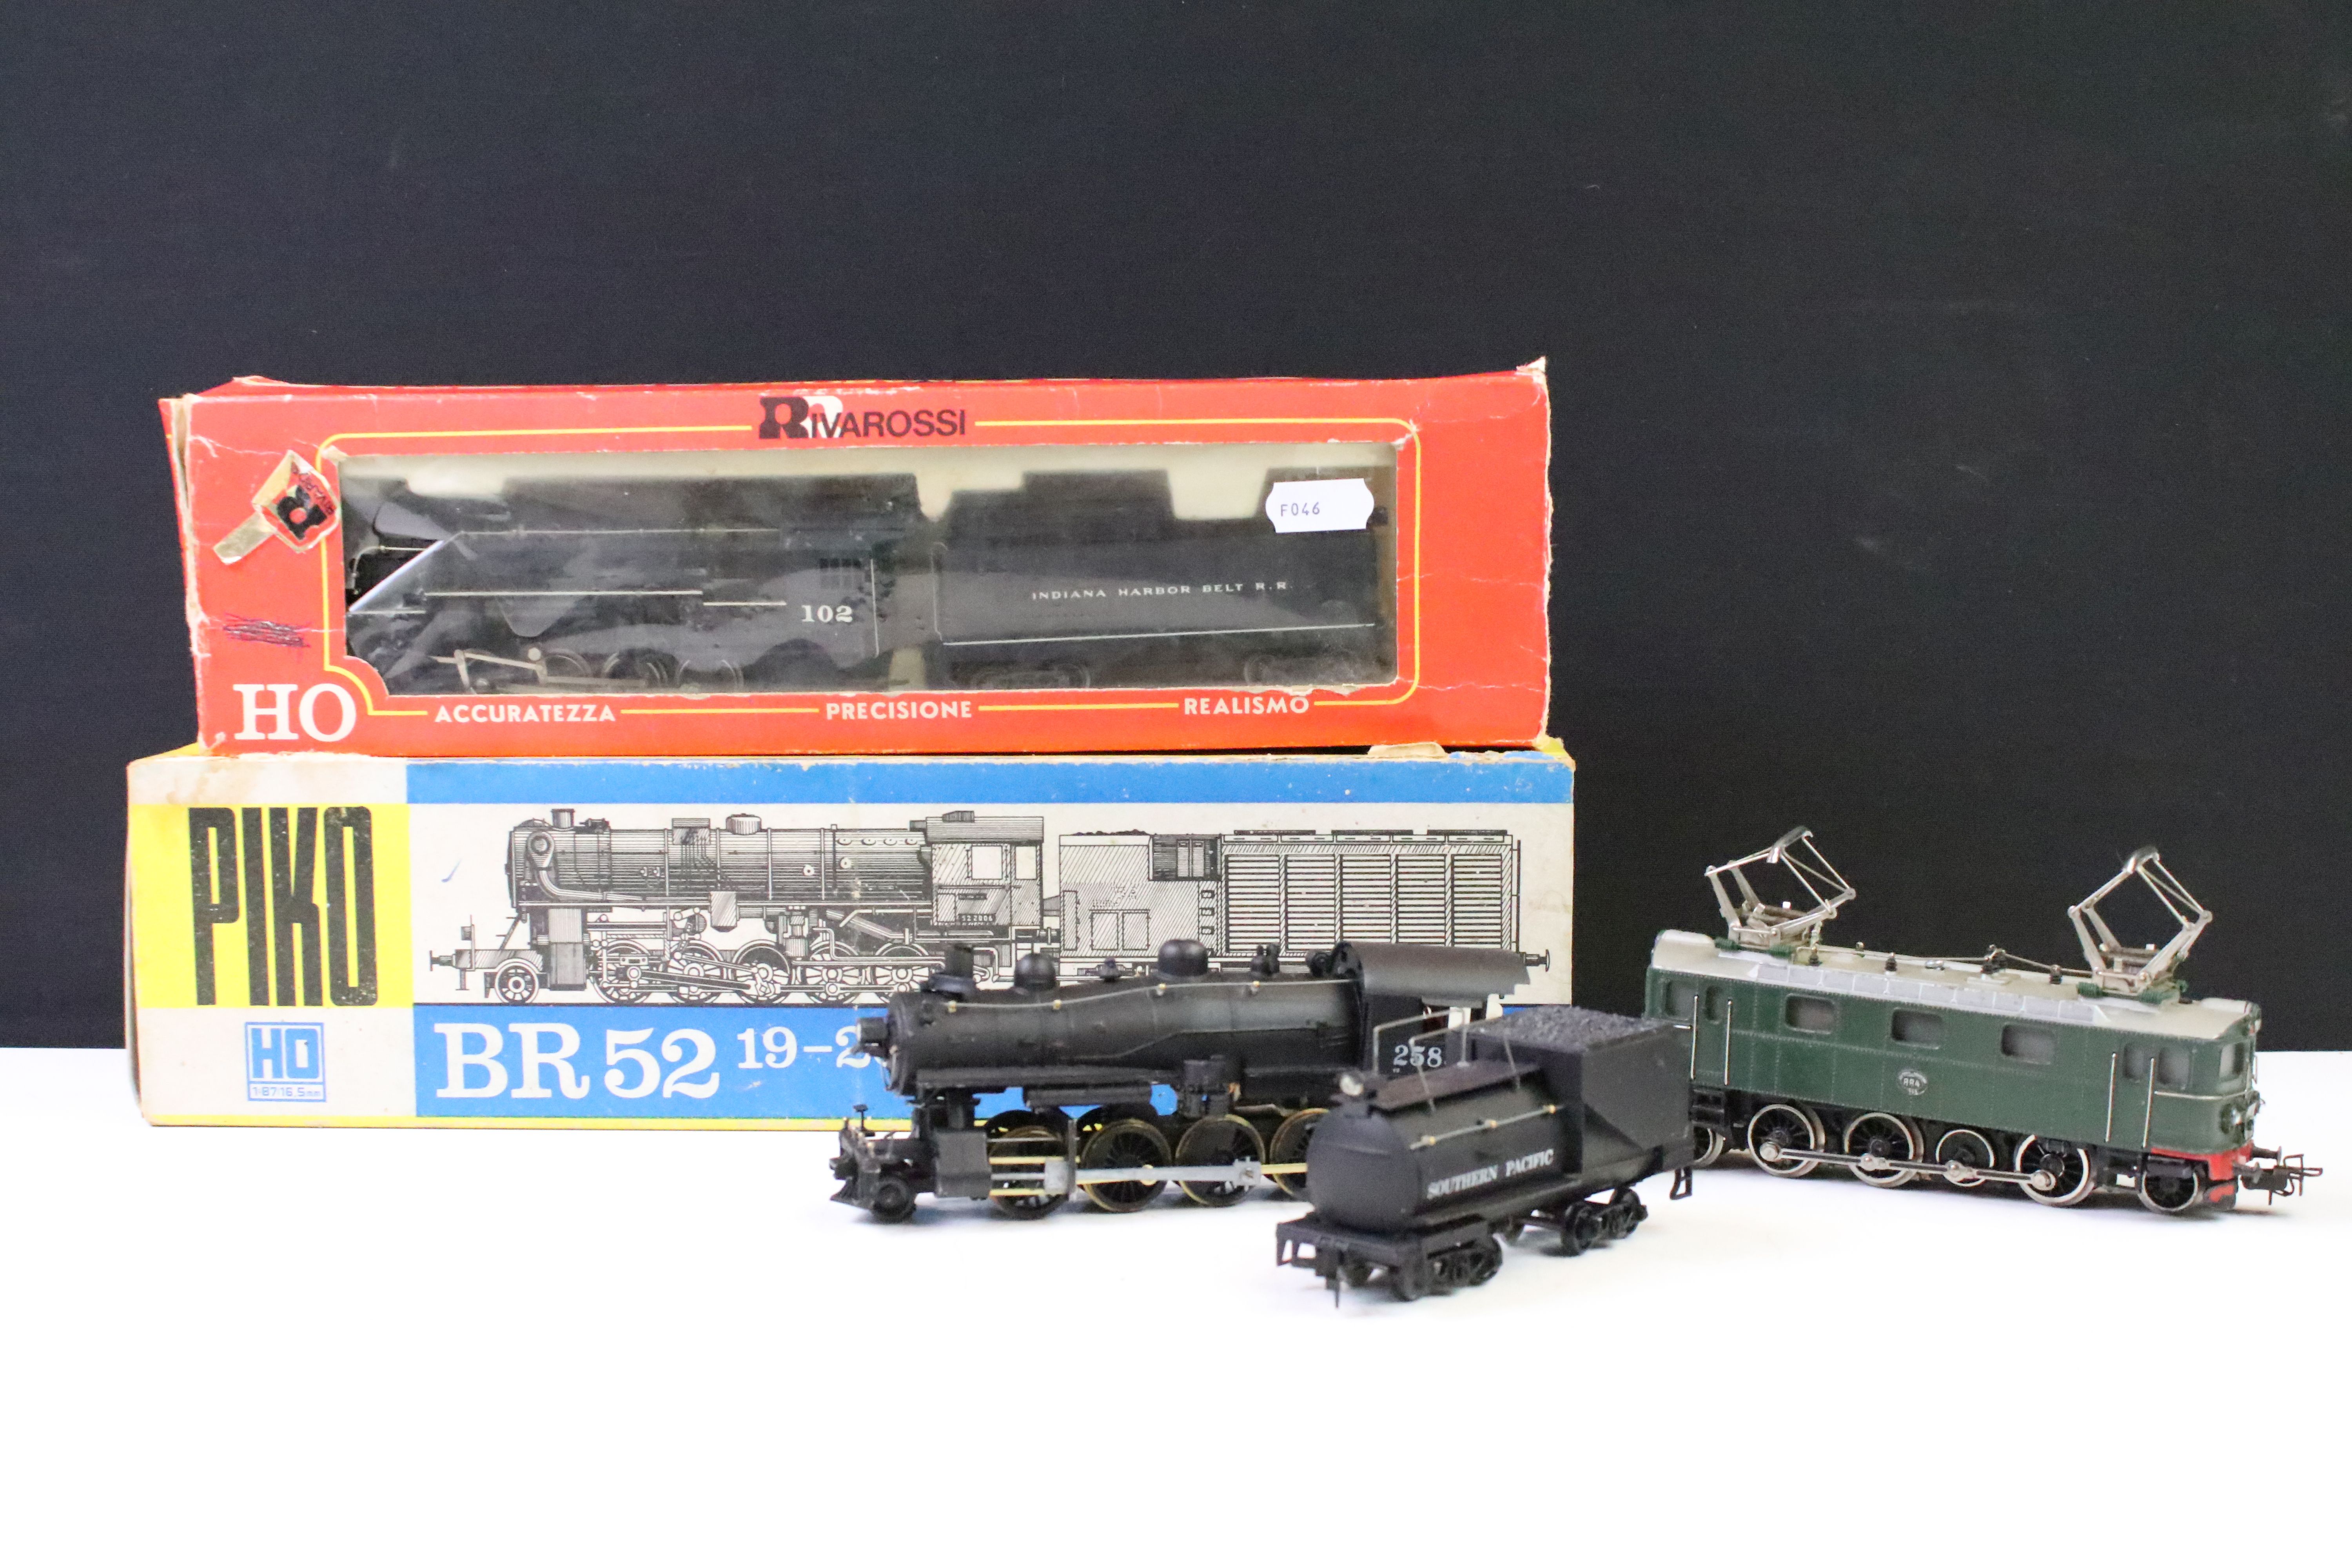 Four Ho gauge locomotives to include a boxed Rivarossi 1224 Indiana Harbour Belt 102, boxed Piko